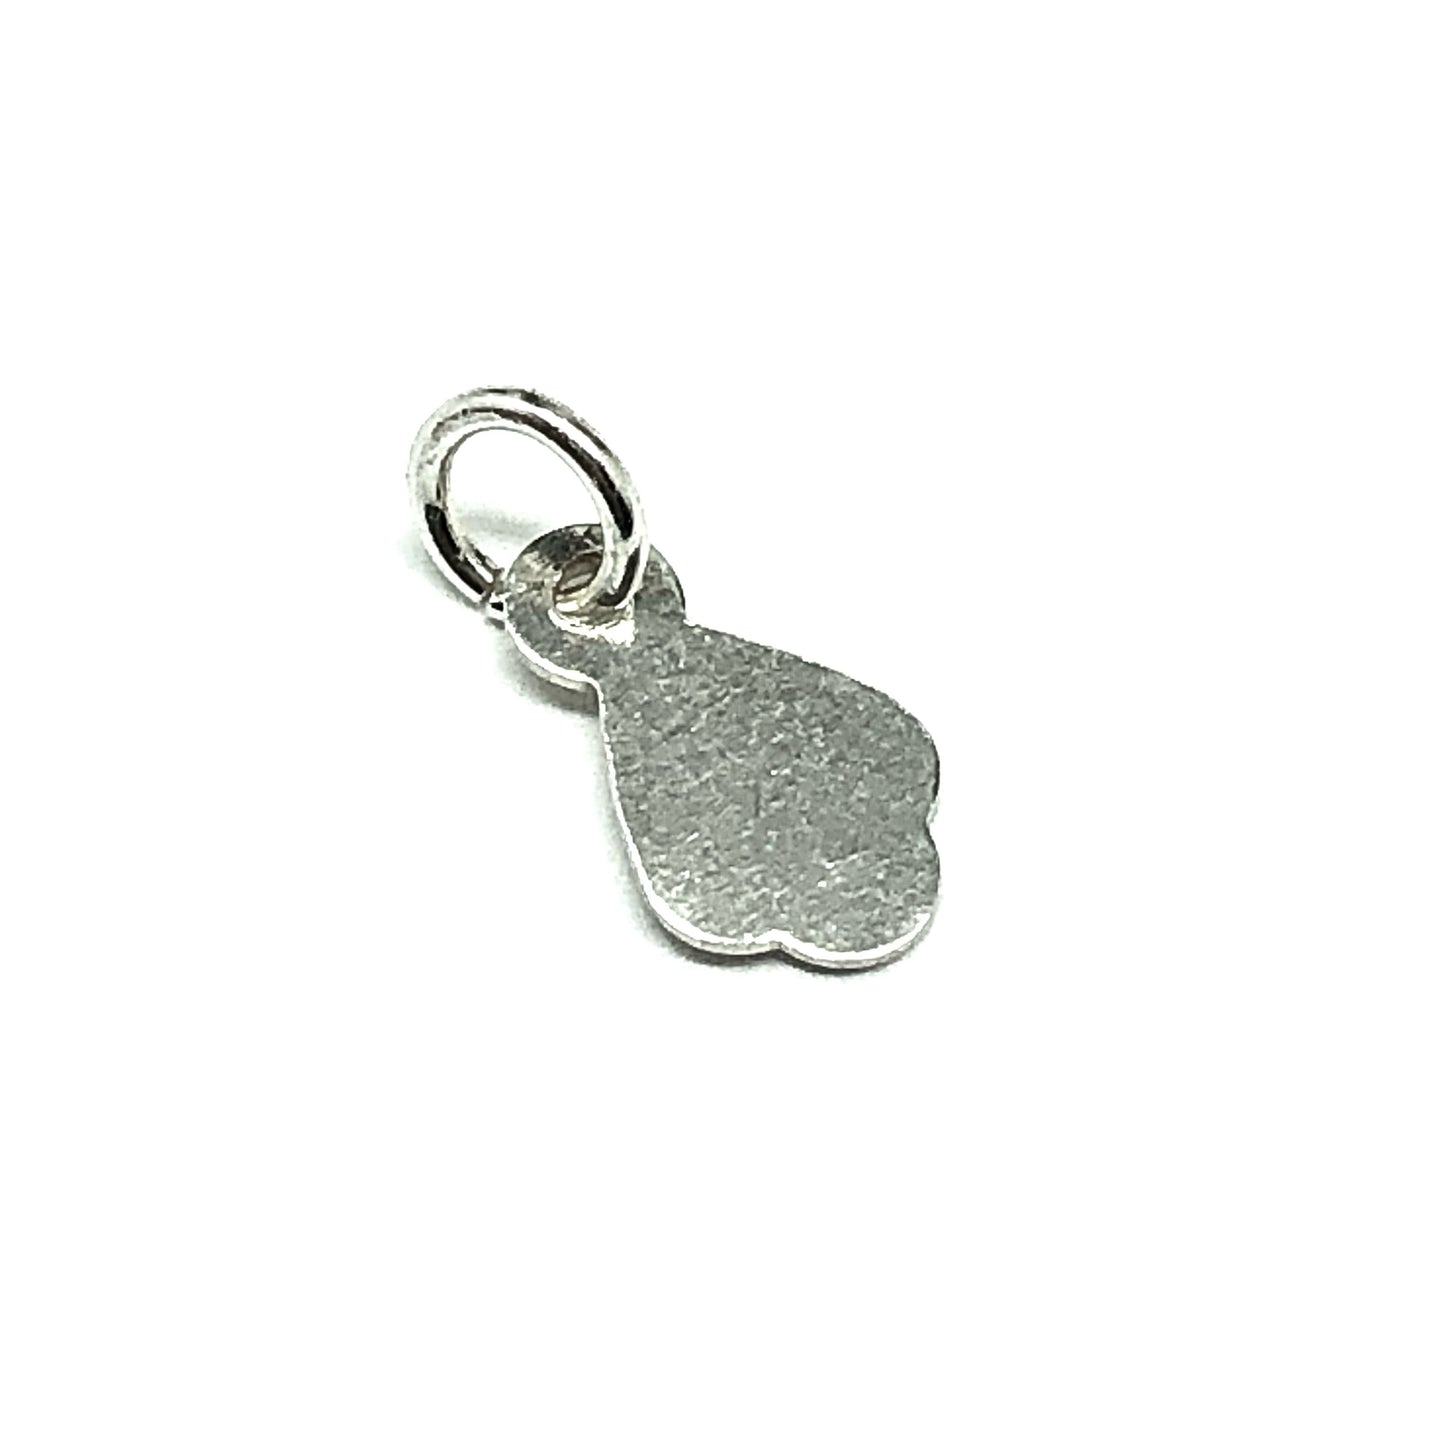 Sterling Silver Scalloped Chain Hang Tag, Hallmark Tag, Stamp Tag, w/ Jumpring - Jewelry Findings